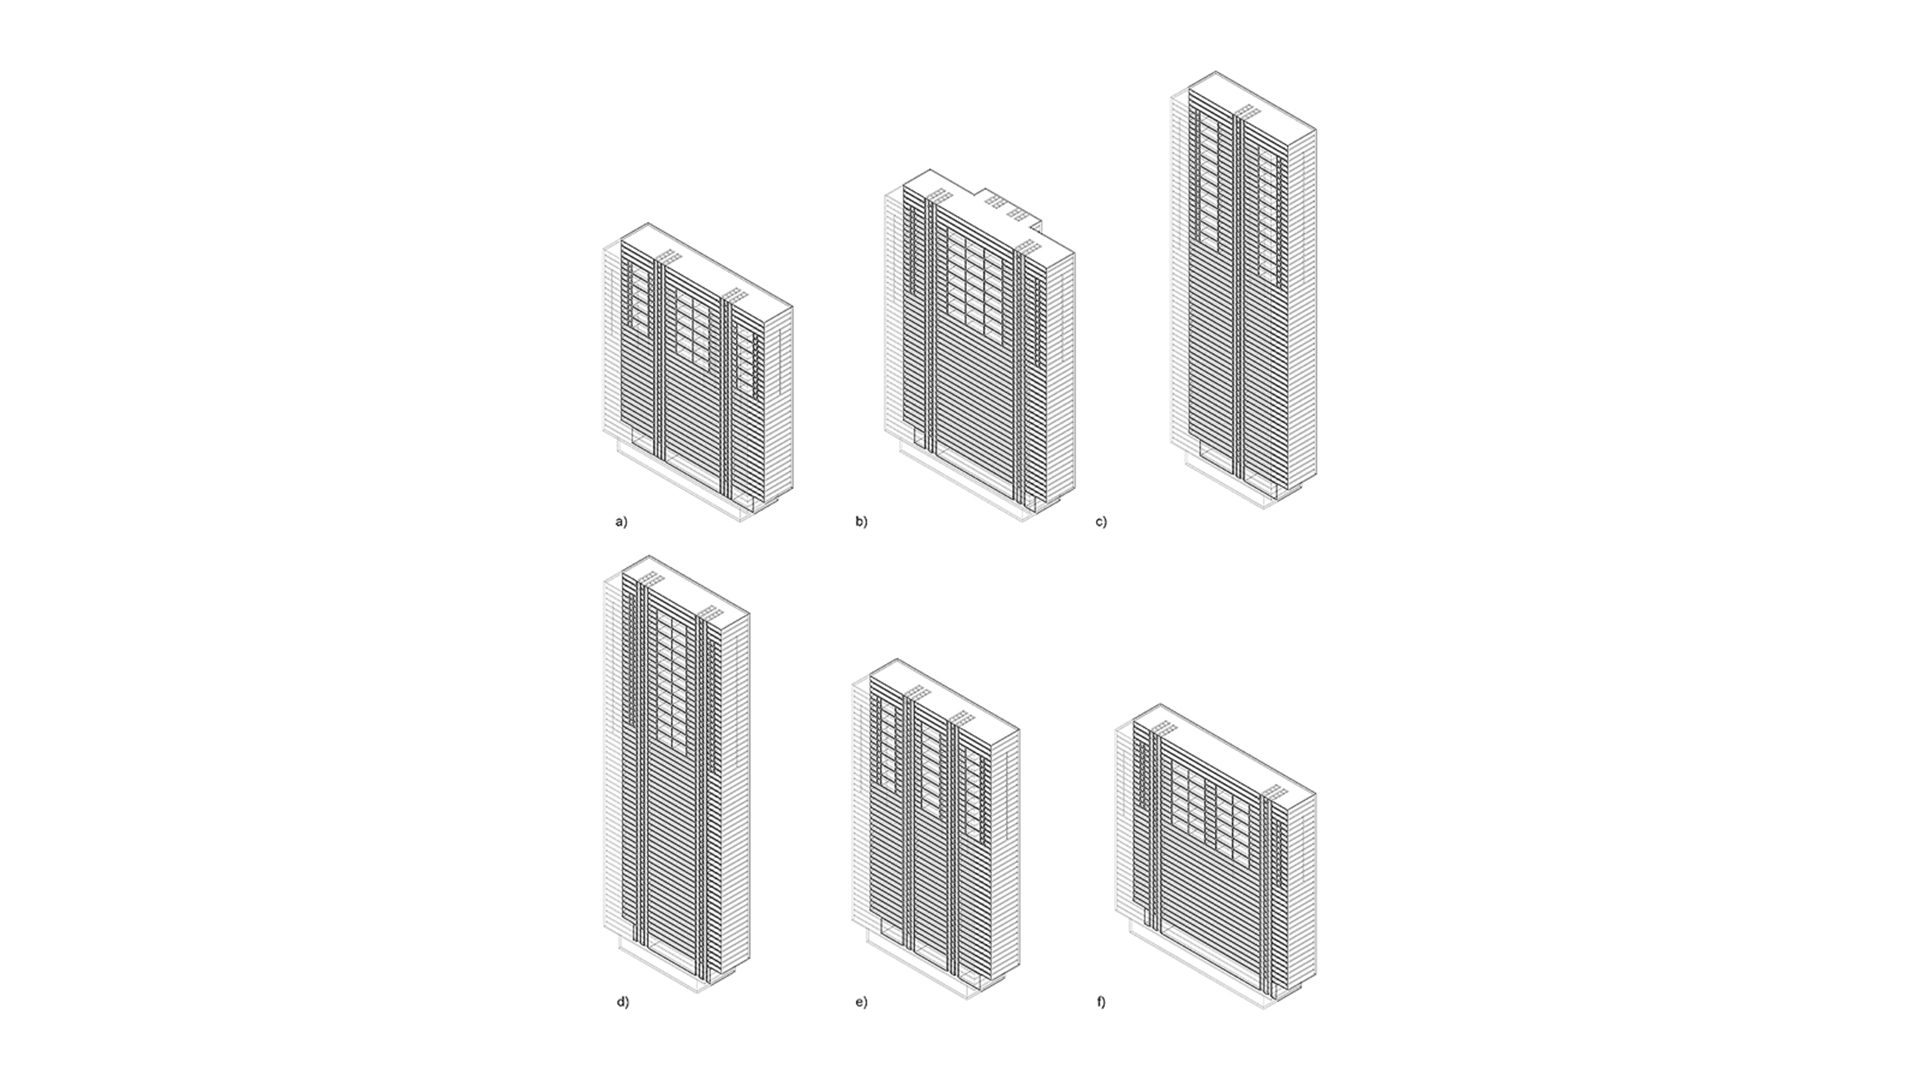 Six sectional models of Miesian courthouse design variations automatically generated by the software implementation of the Dirksen Grammar